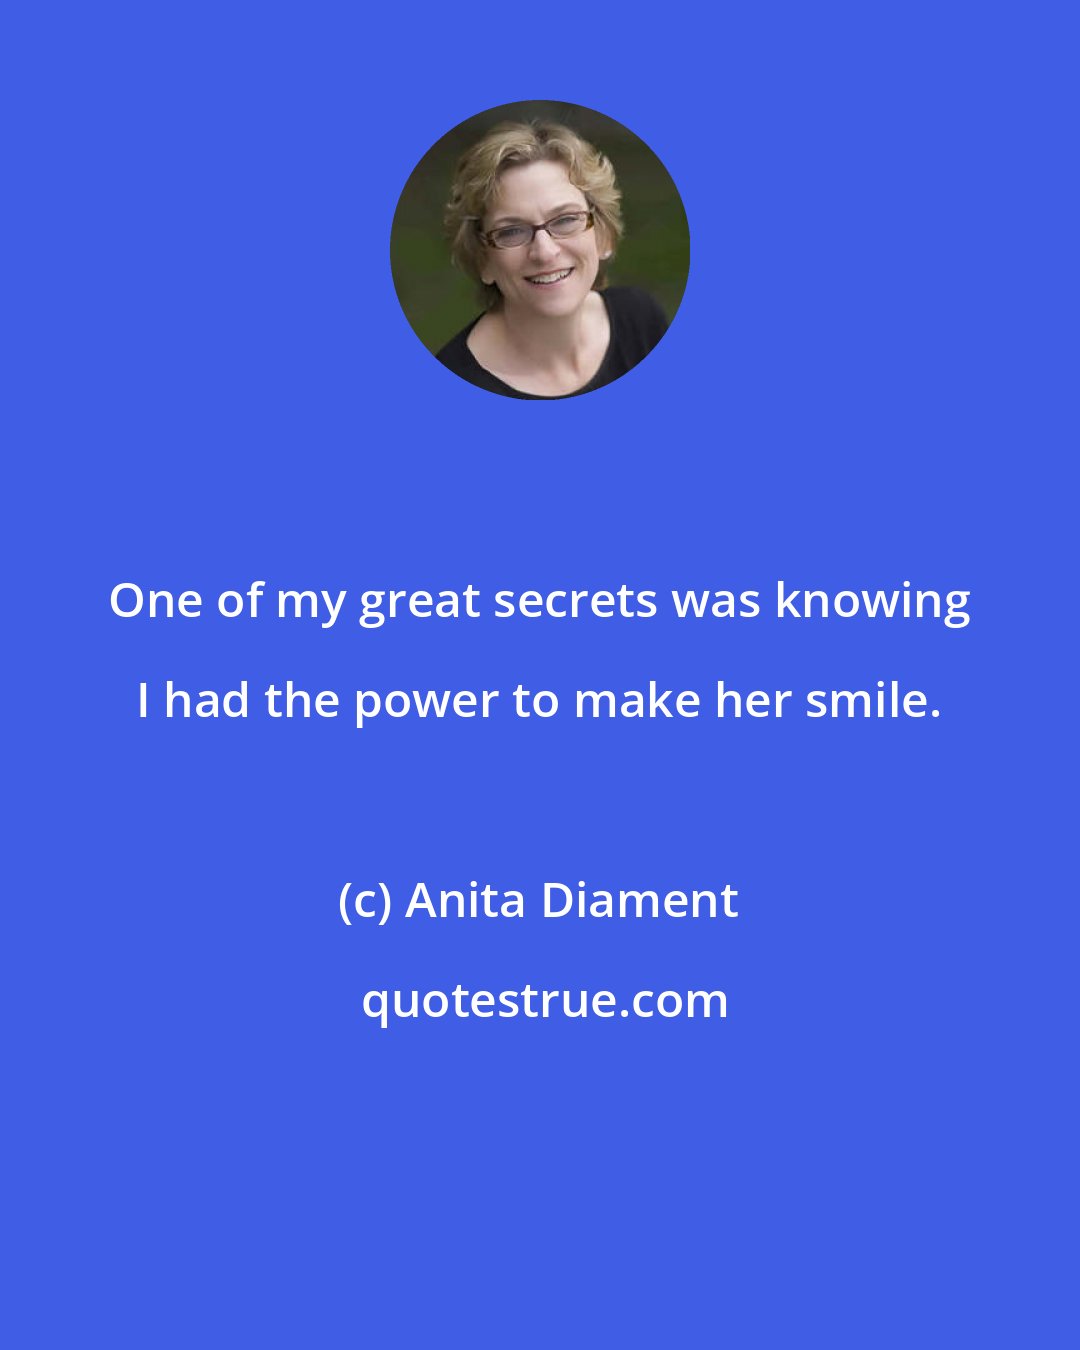 Anita Diament: One of my great secrets was knowing I had the power to make her smile.